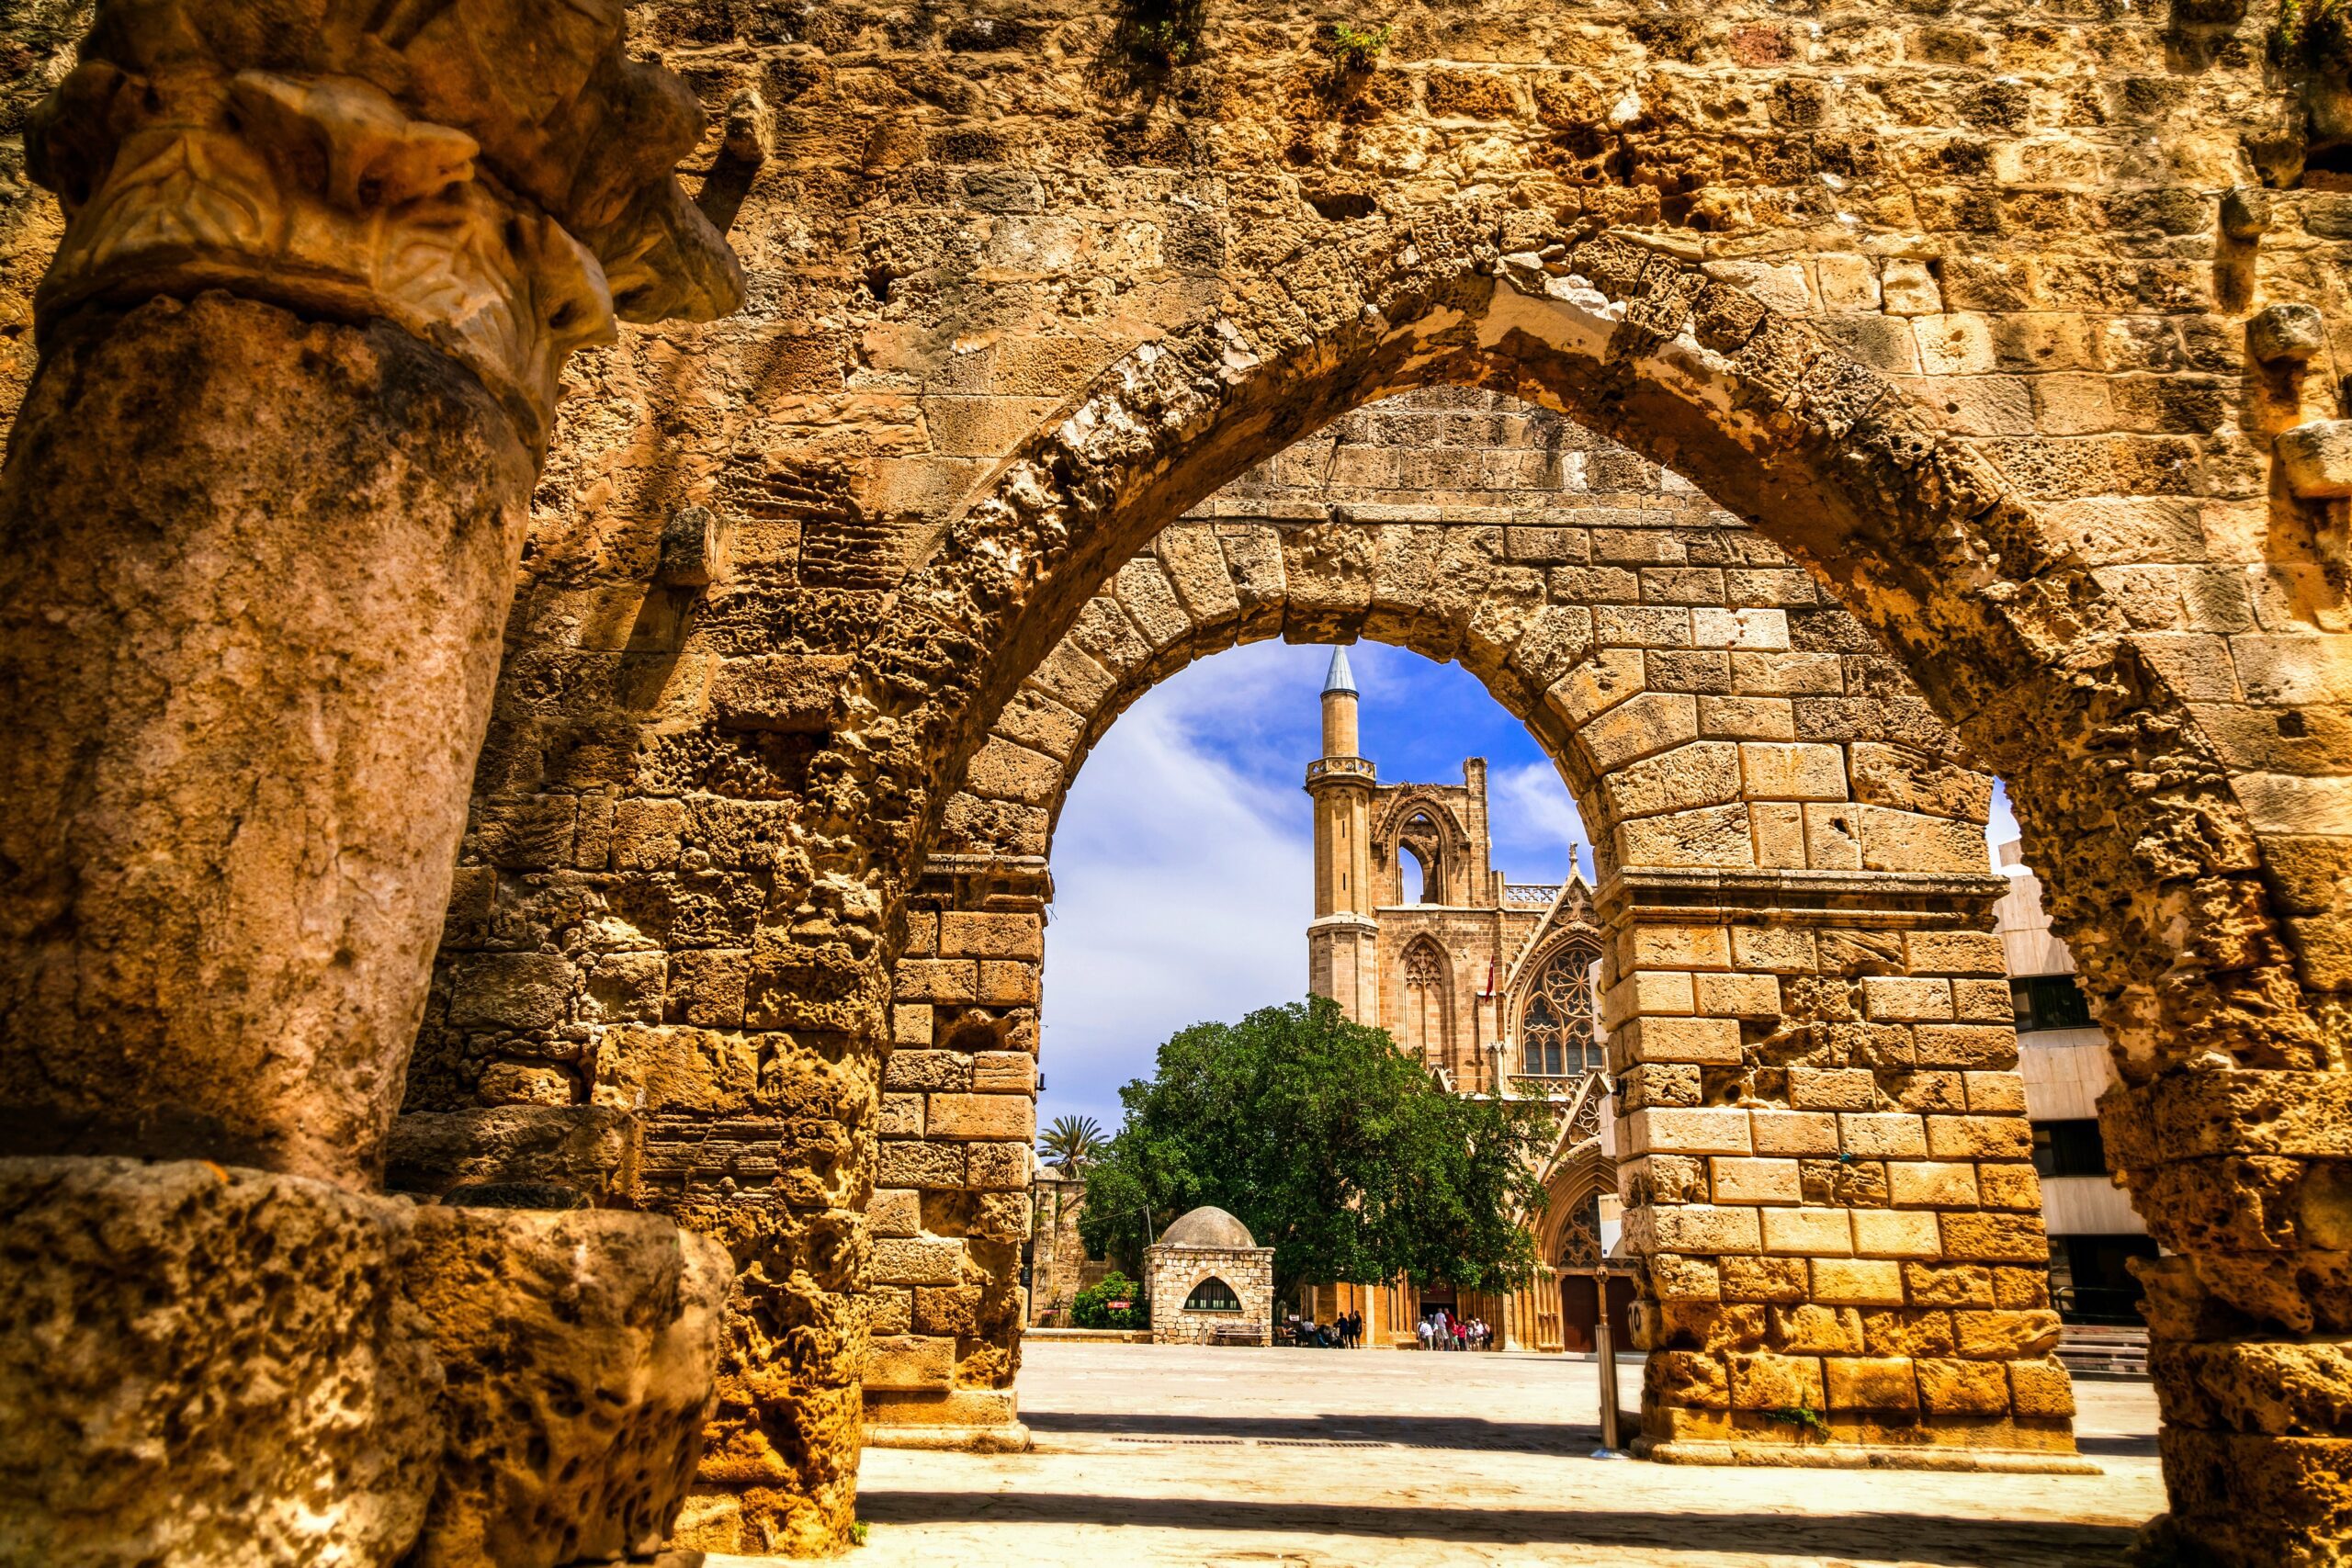 Exterior view of the Lala Mustafa Pasha Mosque, formerly known as St Nicholas Cathedral, a medieval architectural landmark in Famagusta, Cyprus.